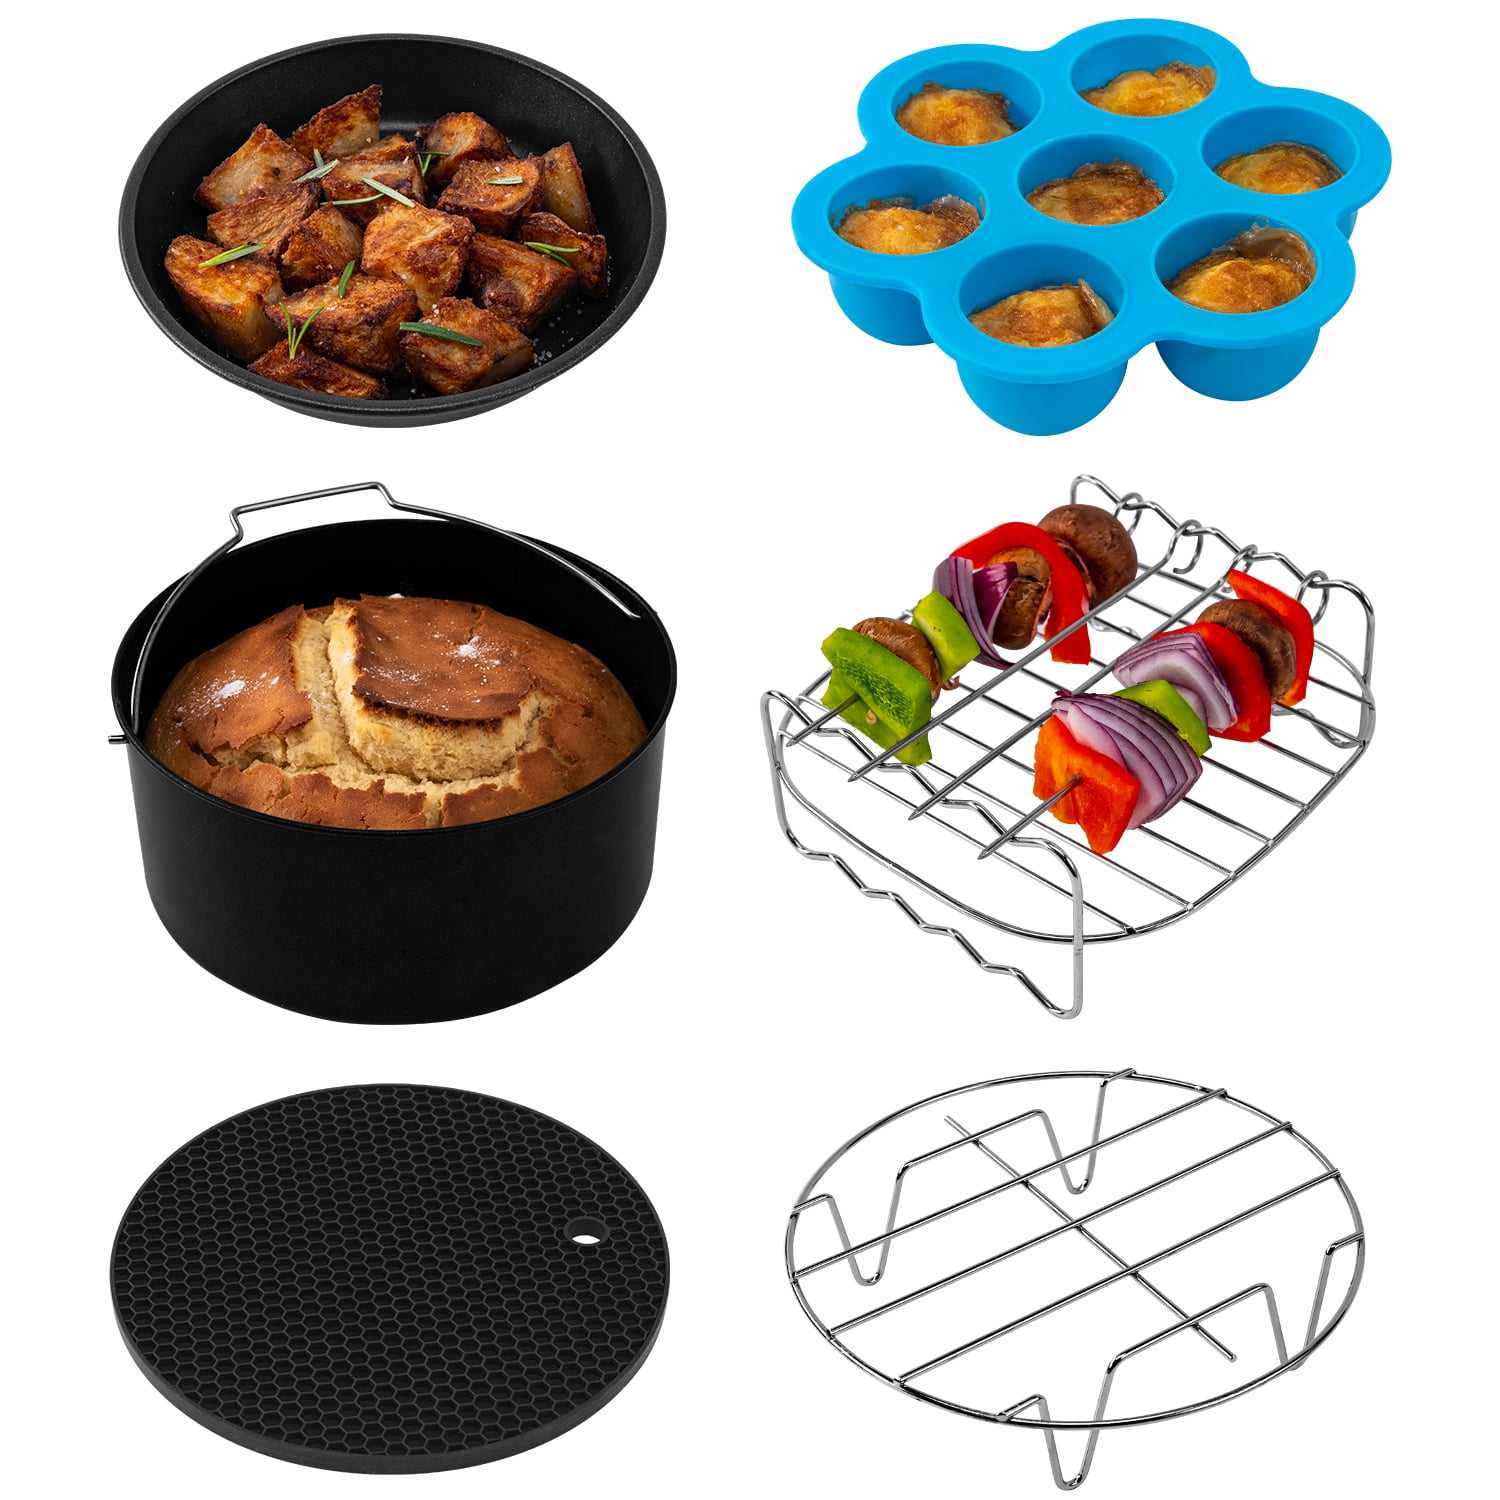 2017 Air Fryer Accessories Accessory List for newbies Airfryer